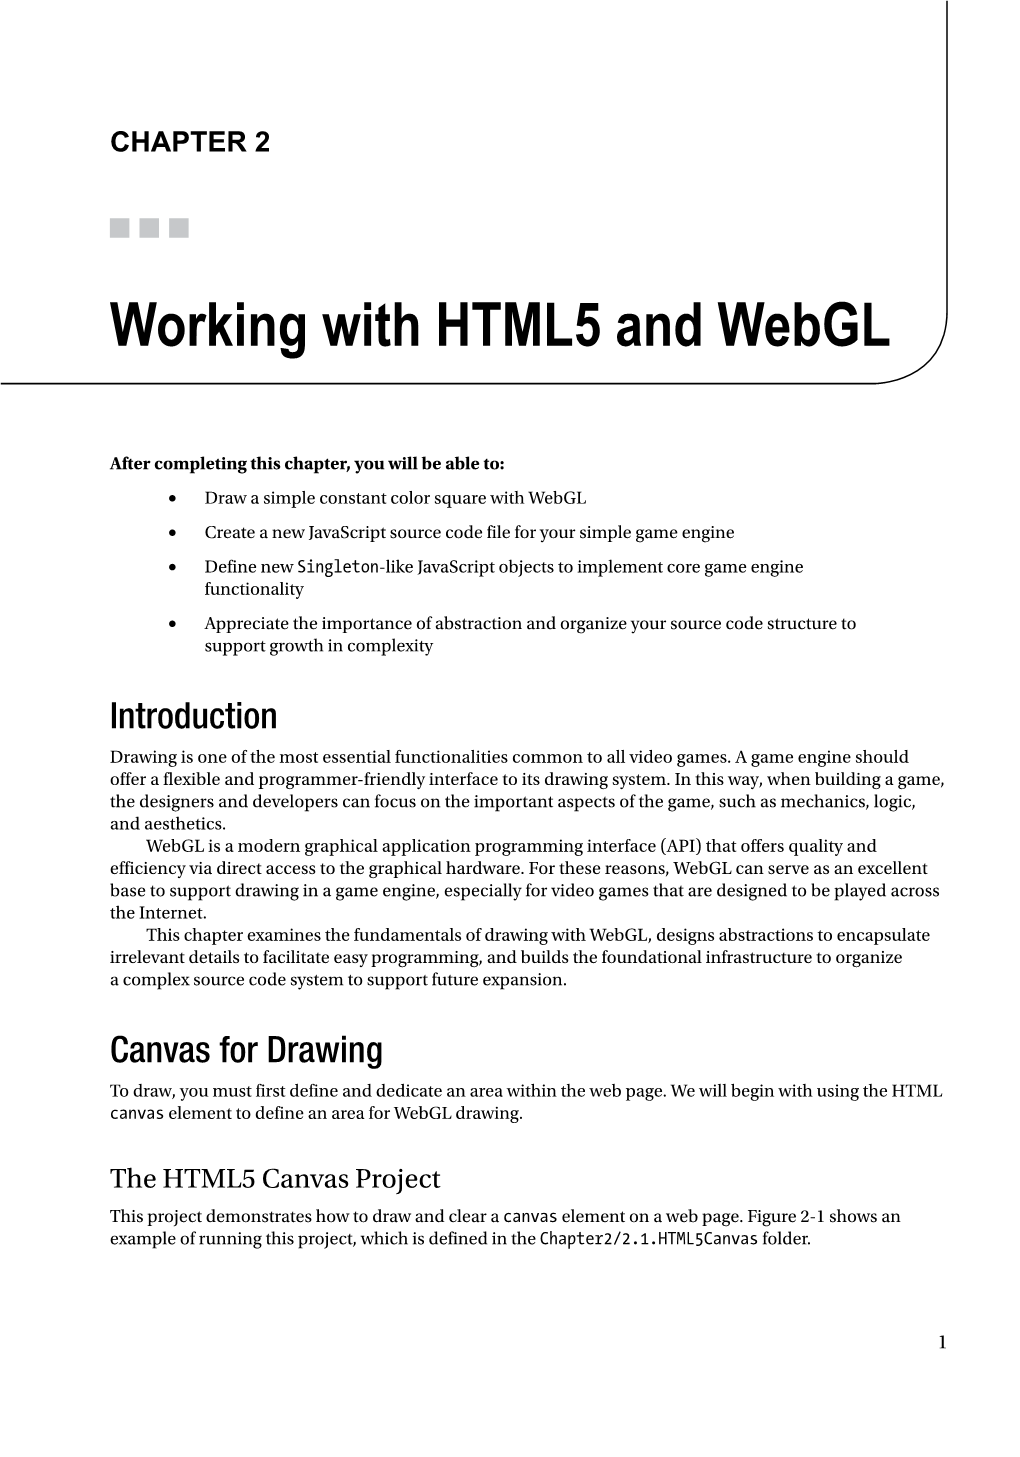 Working with HTML5 and Webgl